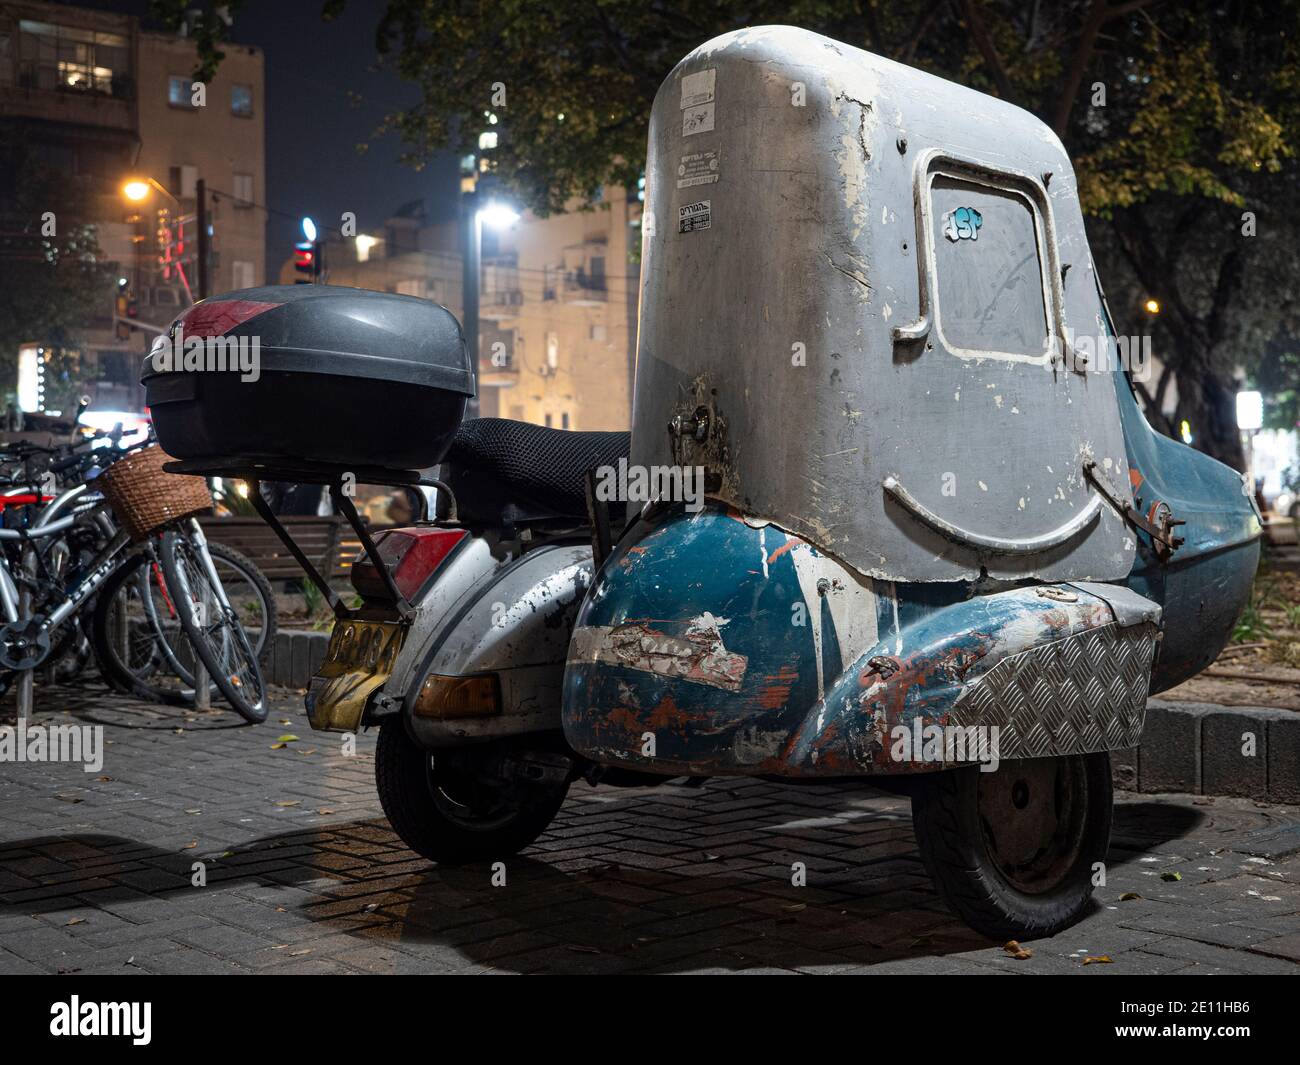 OLD CLASSIC VESPA SCOOTER WITH COVERED SIDECAE SEAT PARKING IN URBAN PARKING LOCATION AT NIGHT. THE SIDE CAR HAS WINDOW AND IT LOOKS LIKE SMILING FACE. Stock Photo